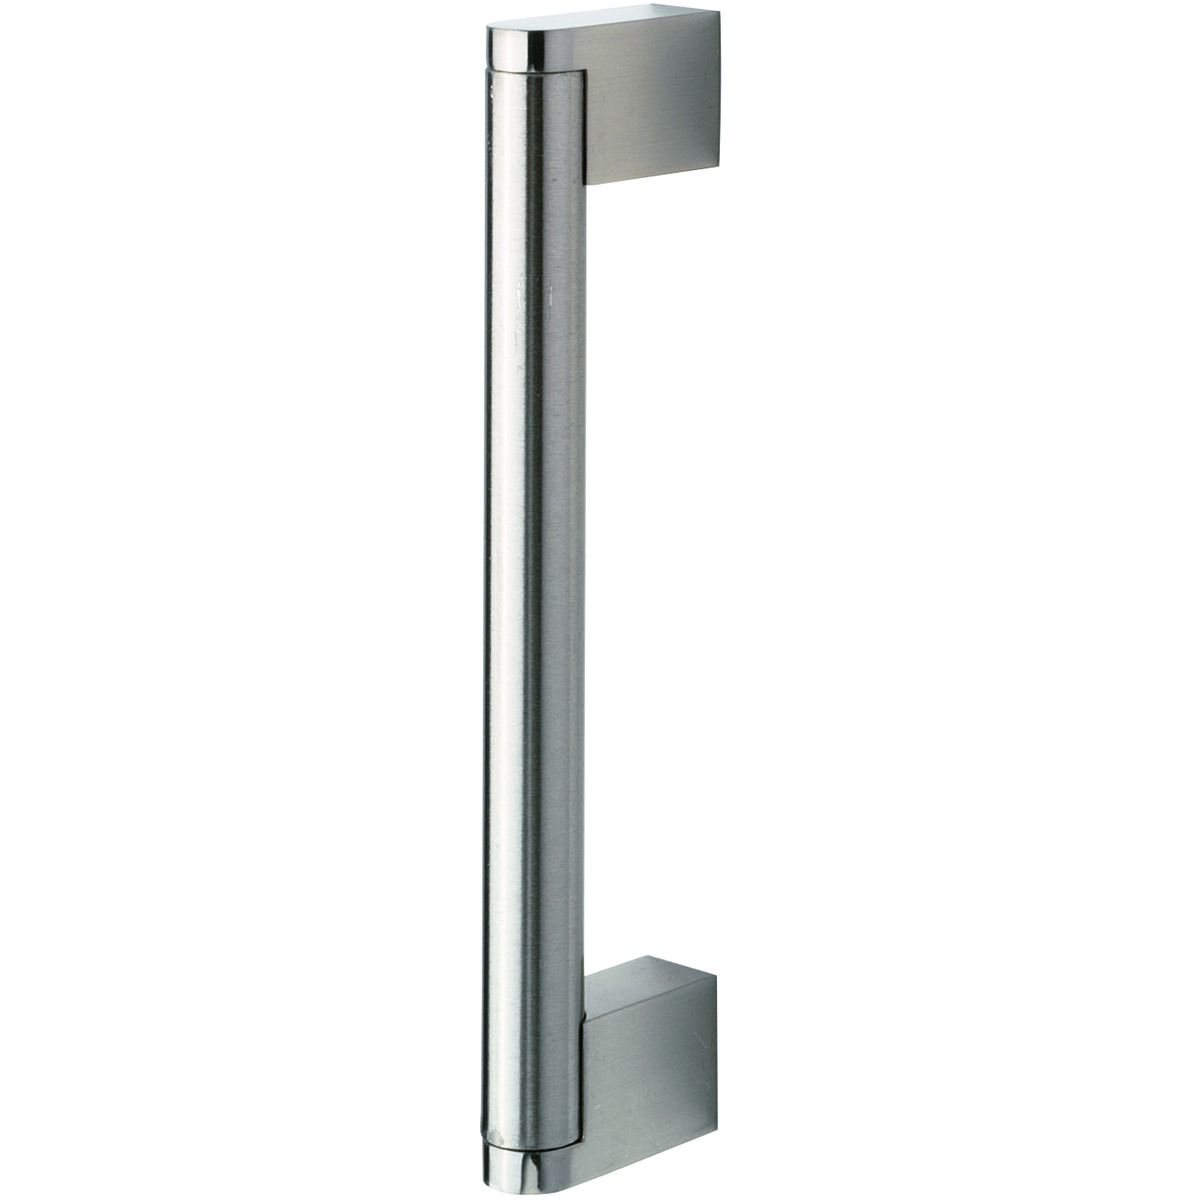 Image of Wickes Stainless Steel Bar Handle for Bathrooms - 160mm